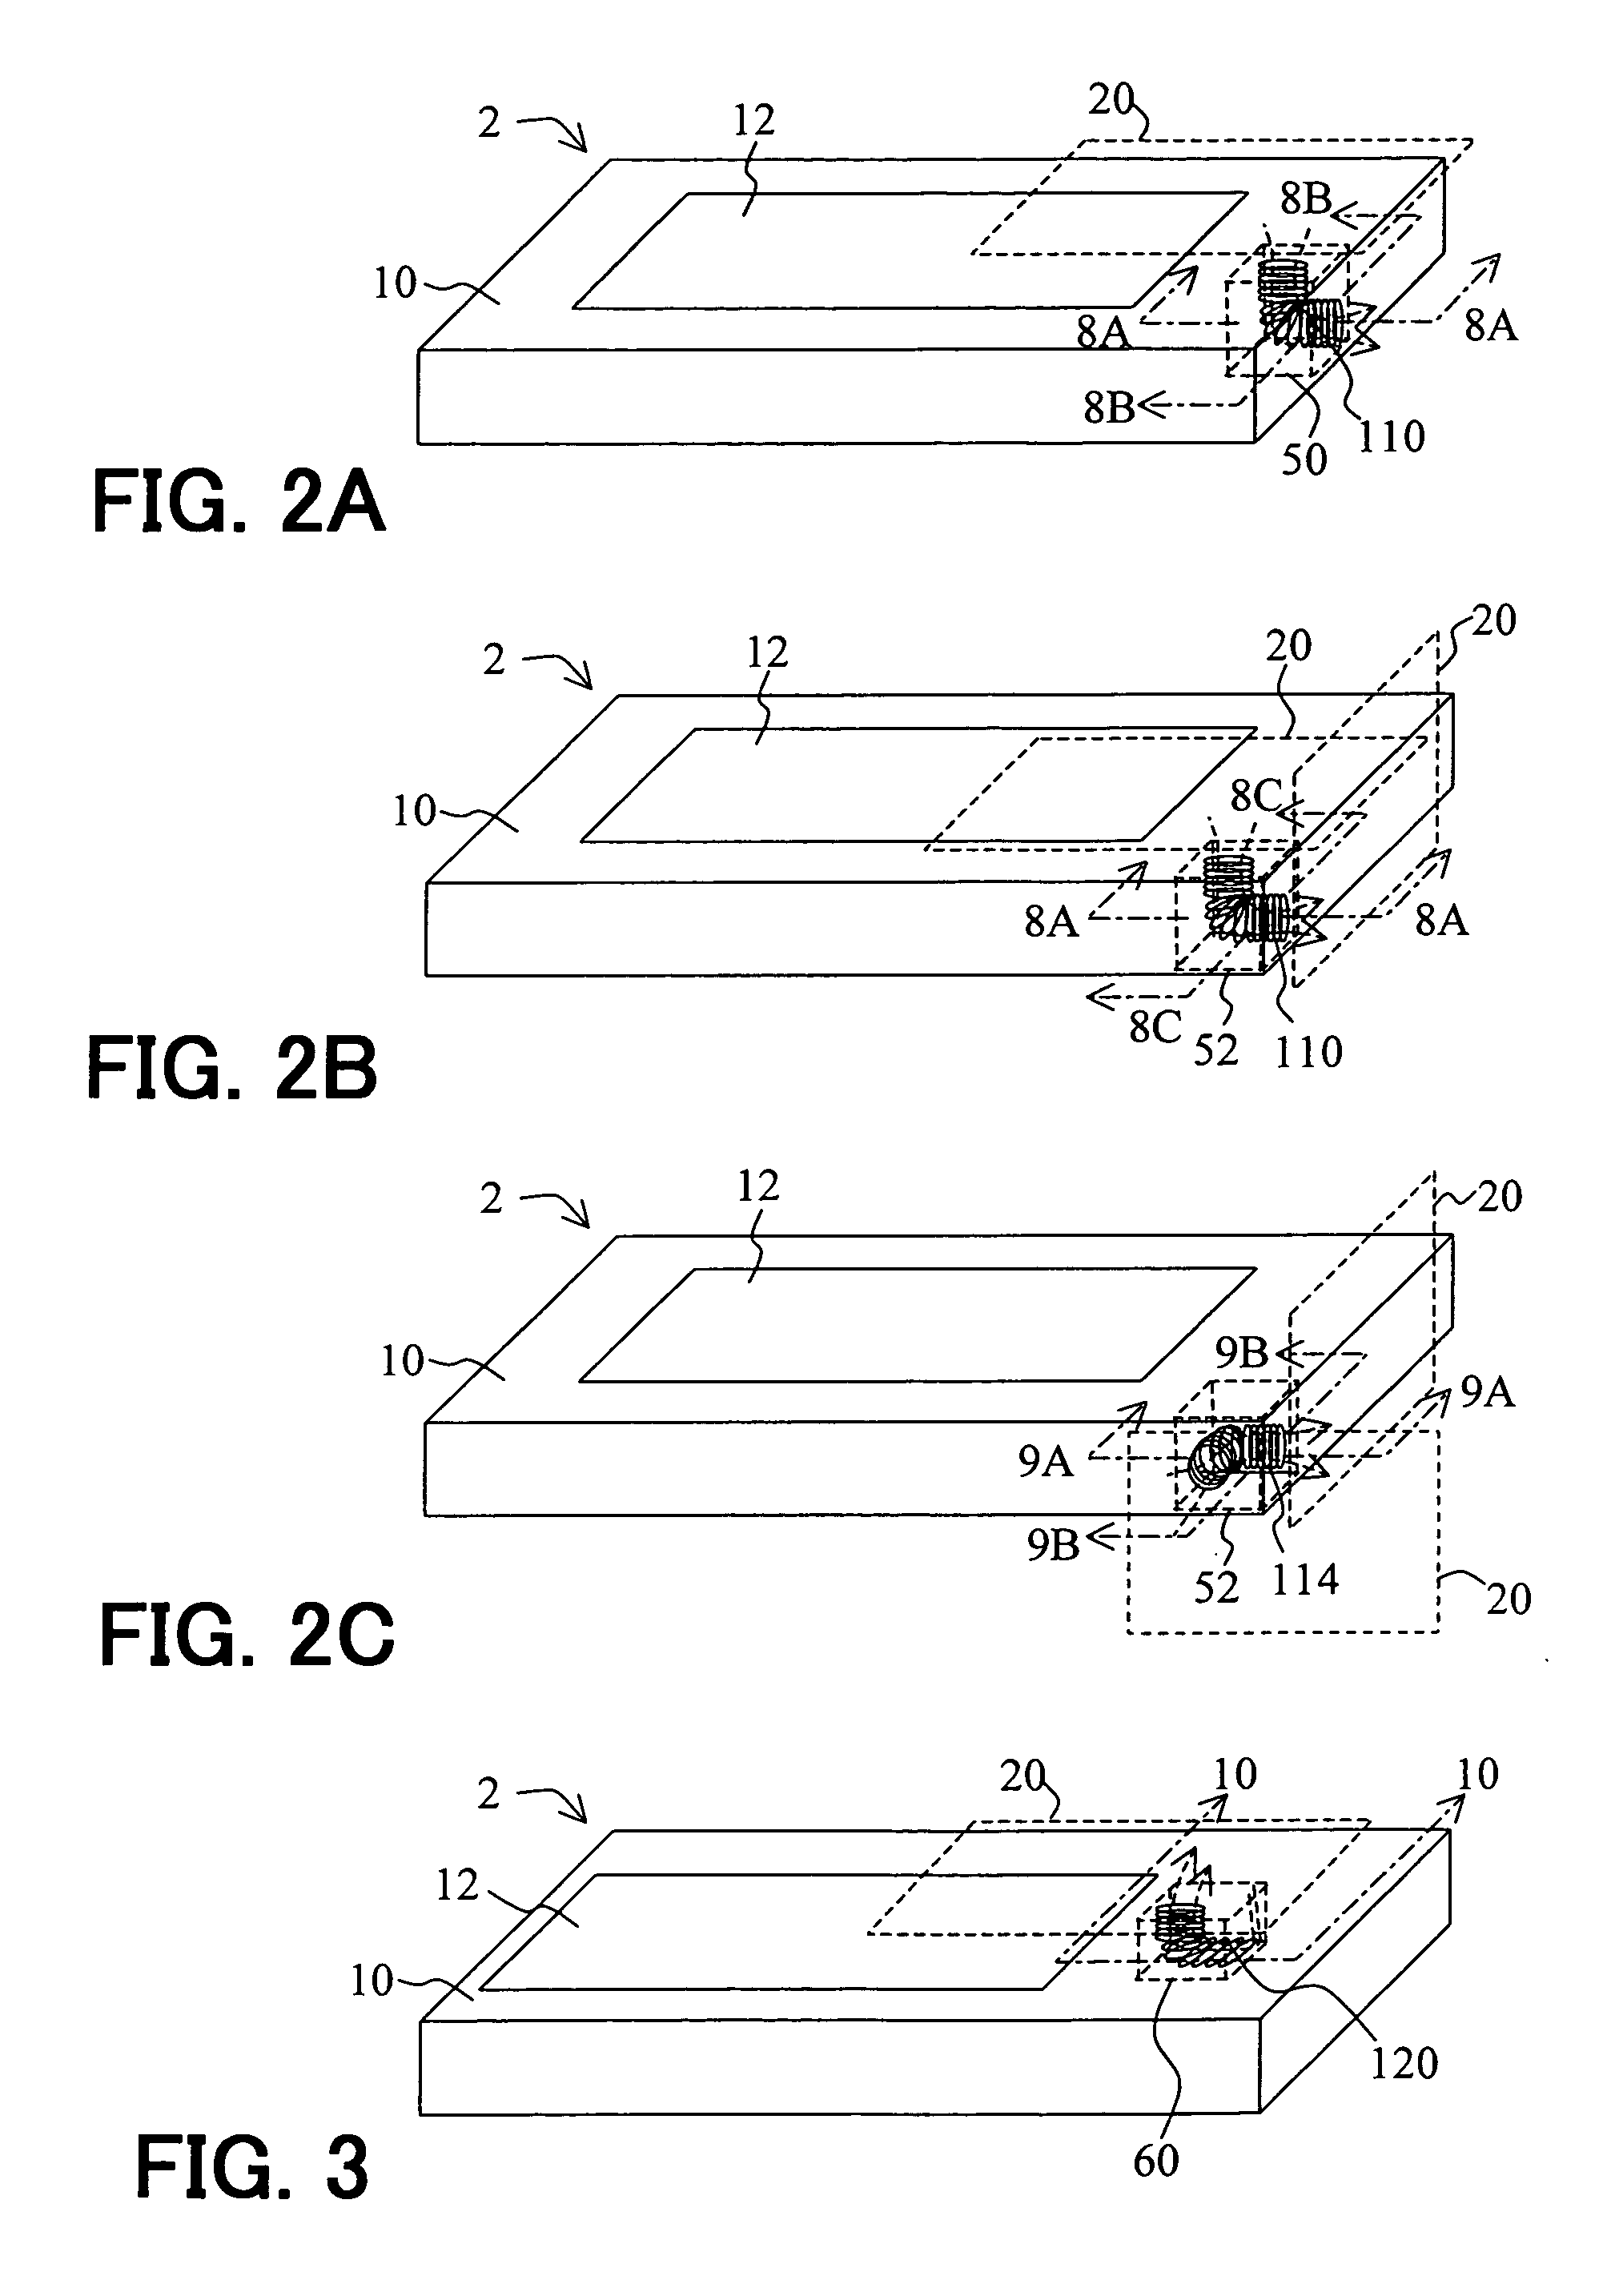 Information processing apparatus with contactless reader/writer, and coil antenna for magnetic coupling